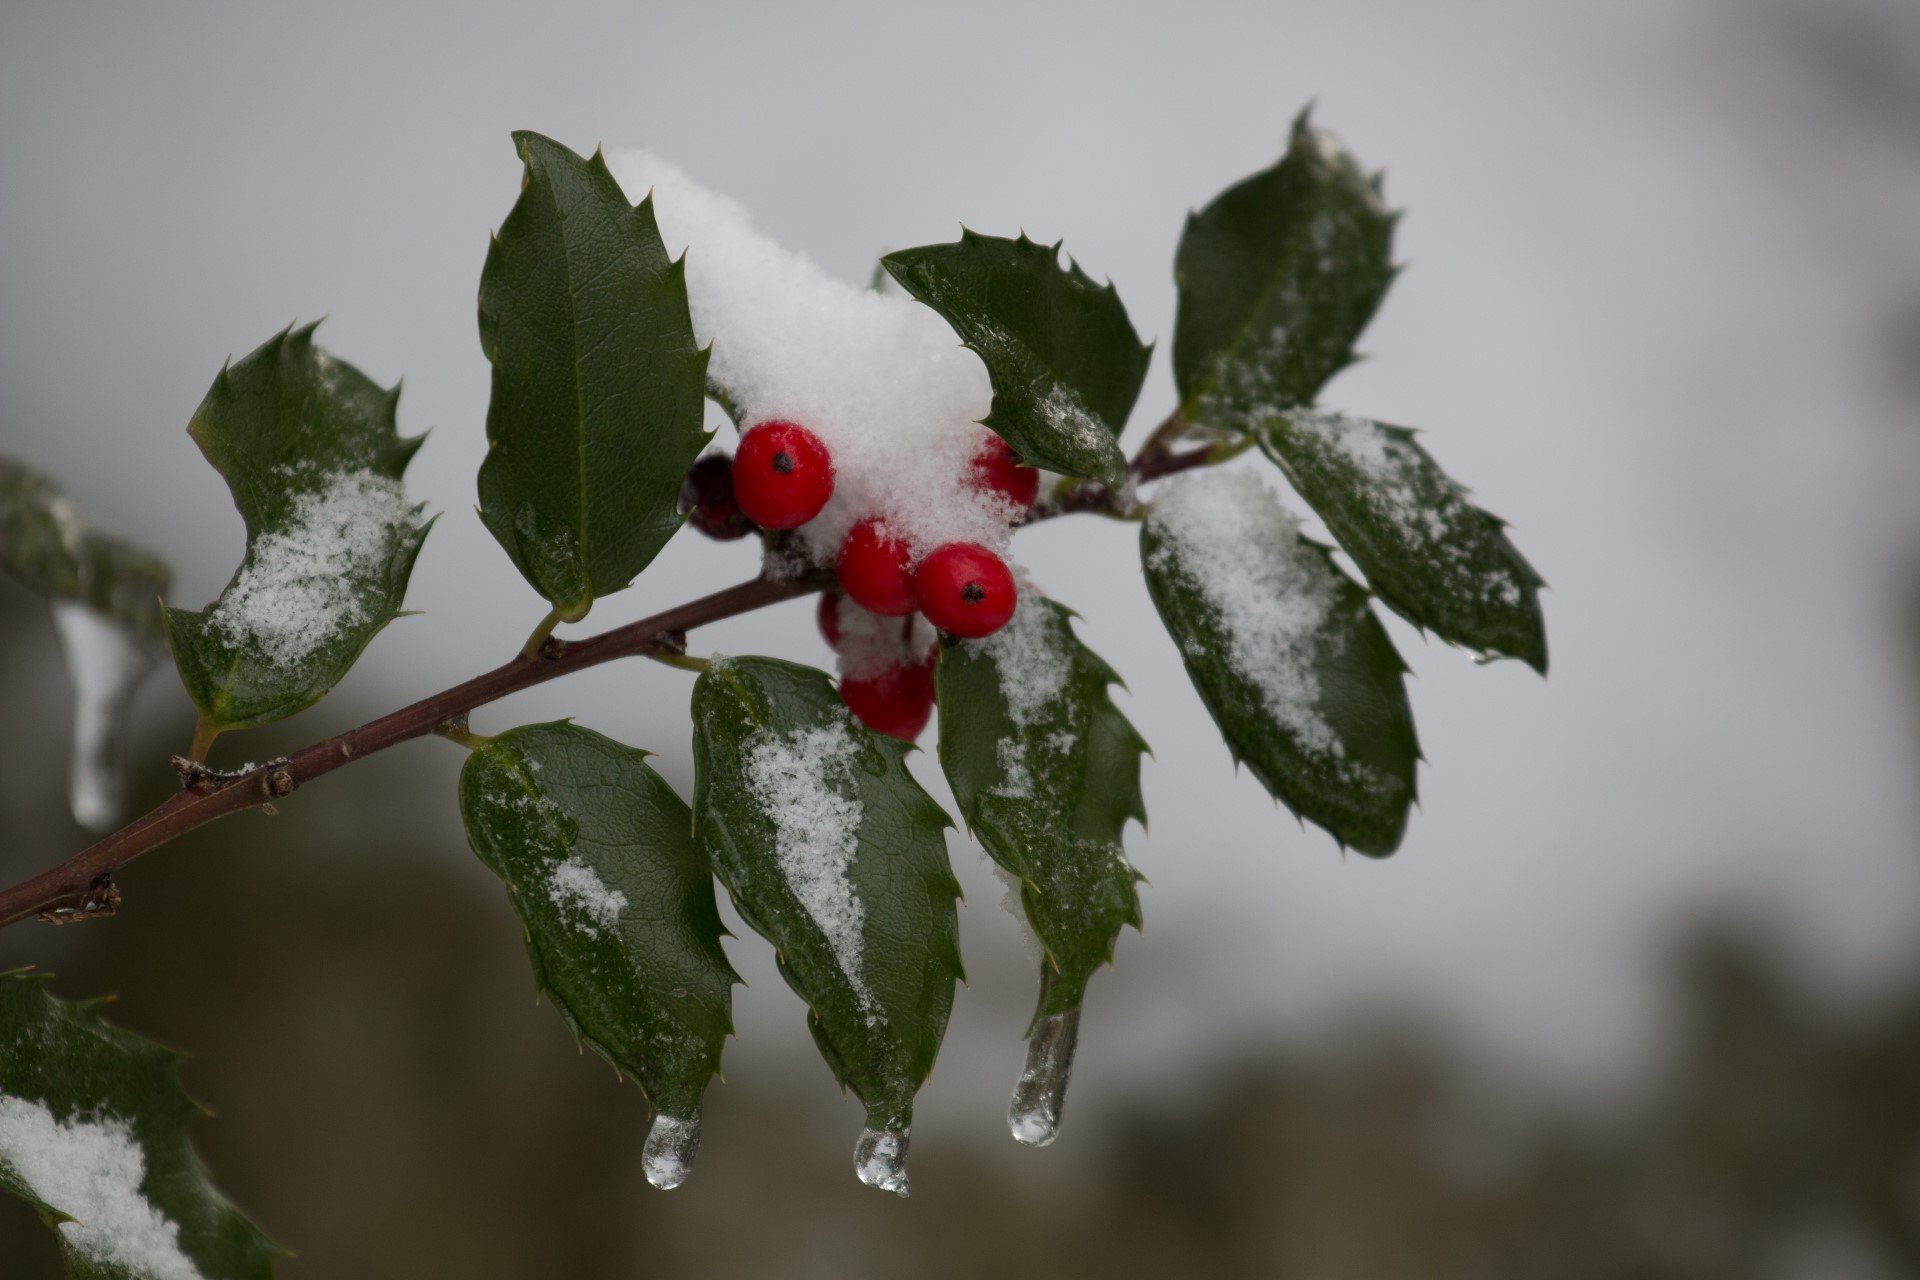 holly plant with berries, snow, and ice drops